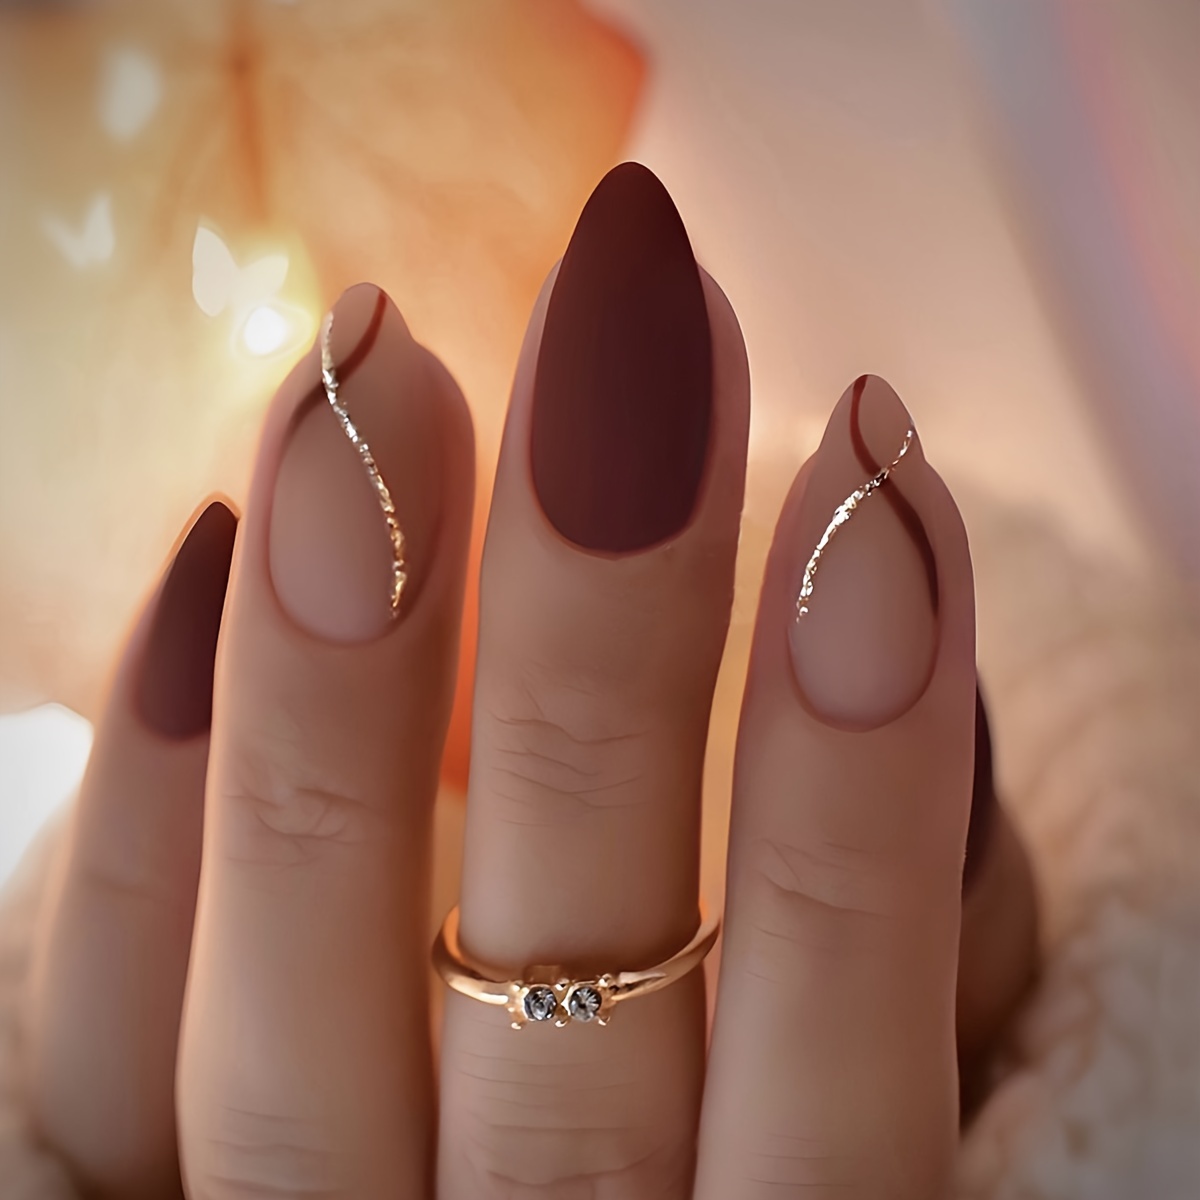 15 Matte Nails Ideas That Are Currently On Trend - Styleoholic